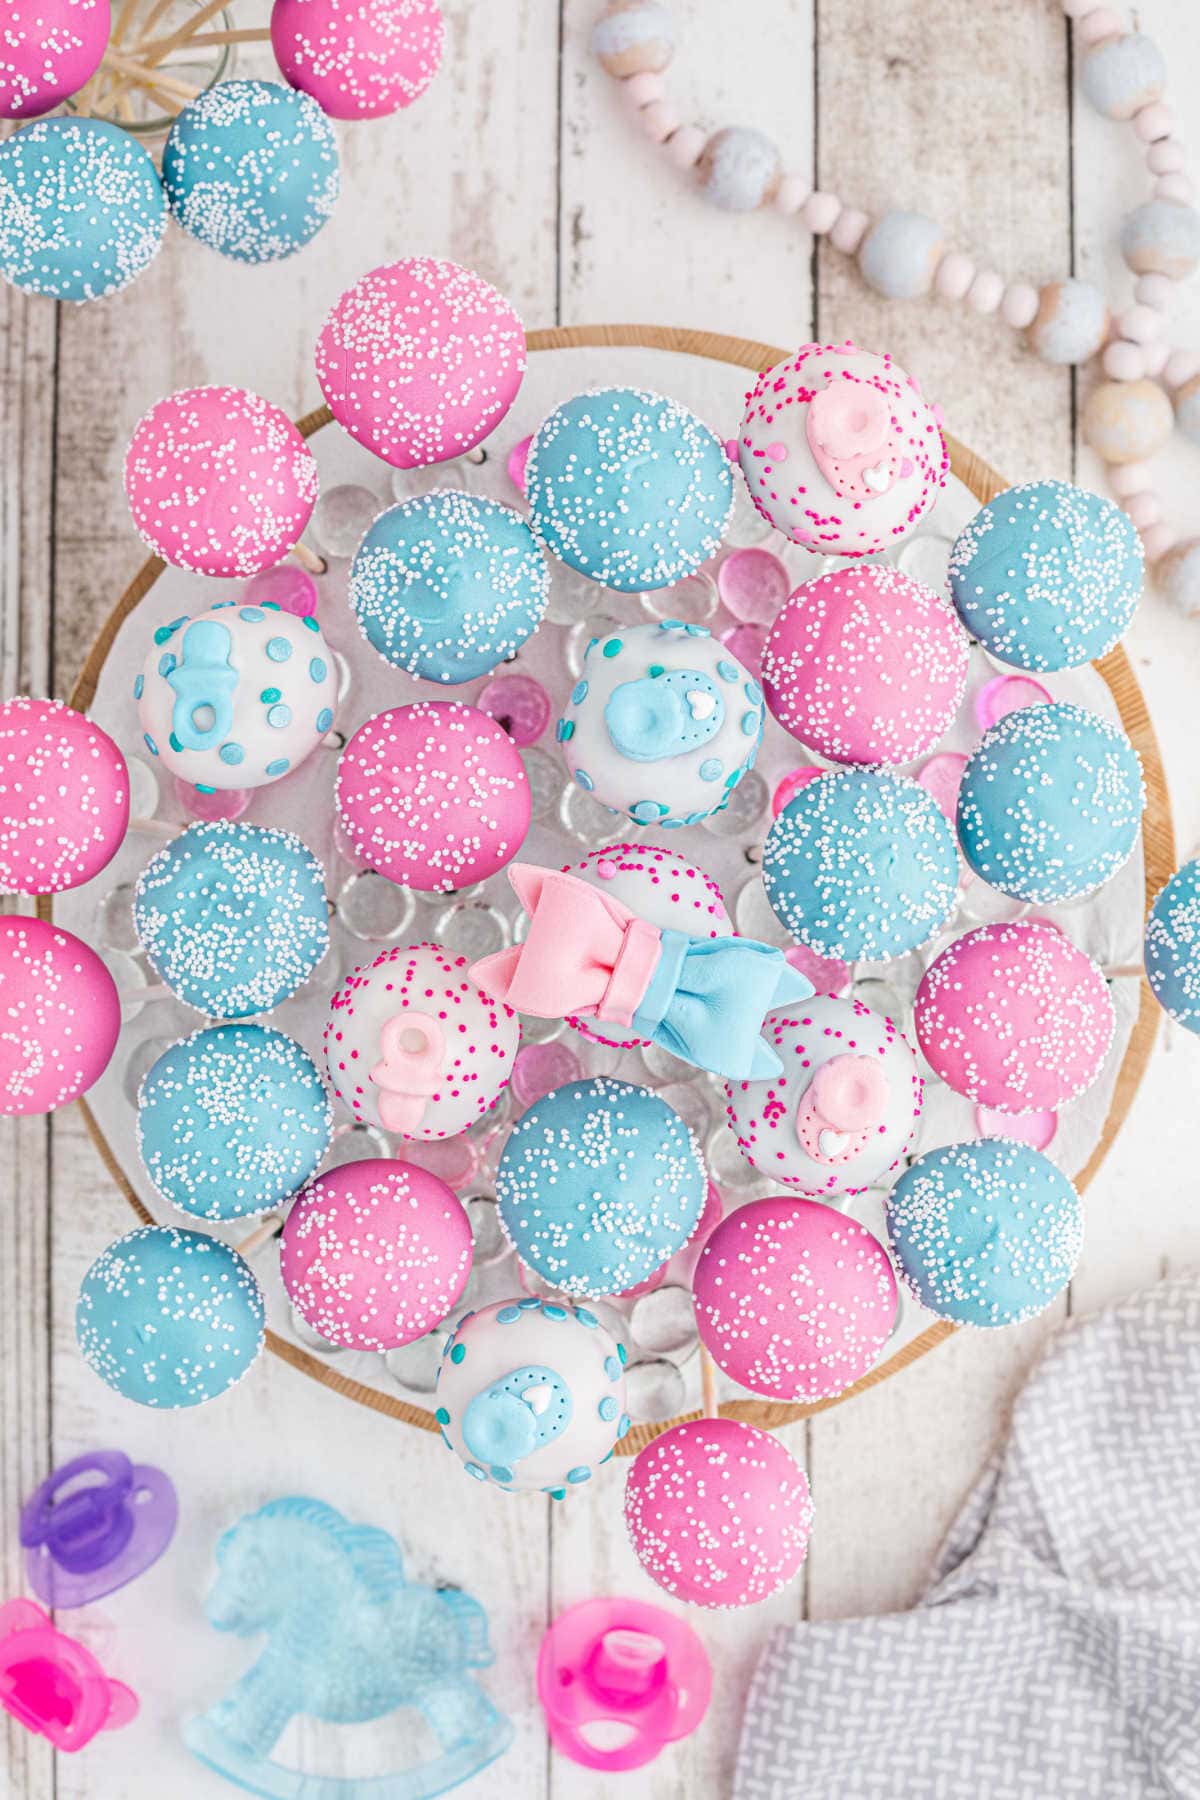 Overhead view of pink and blue cake pops.